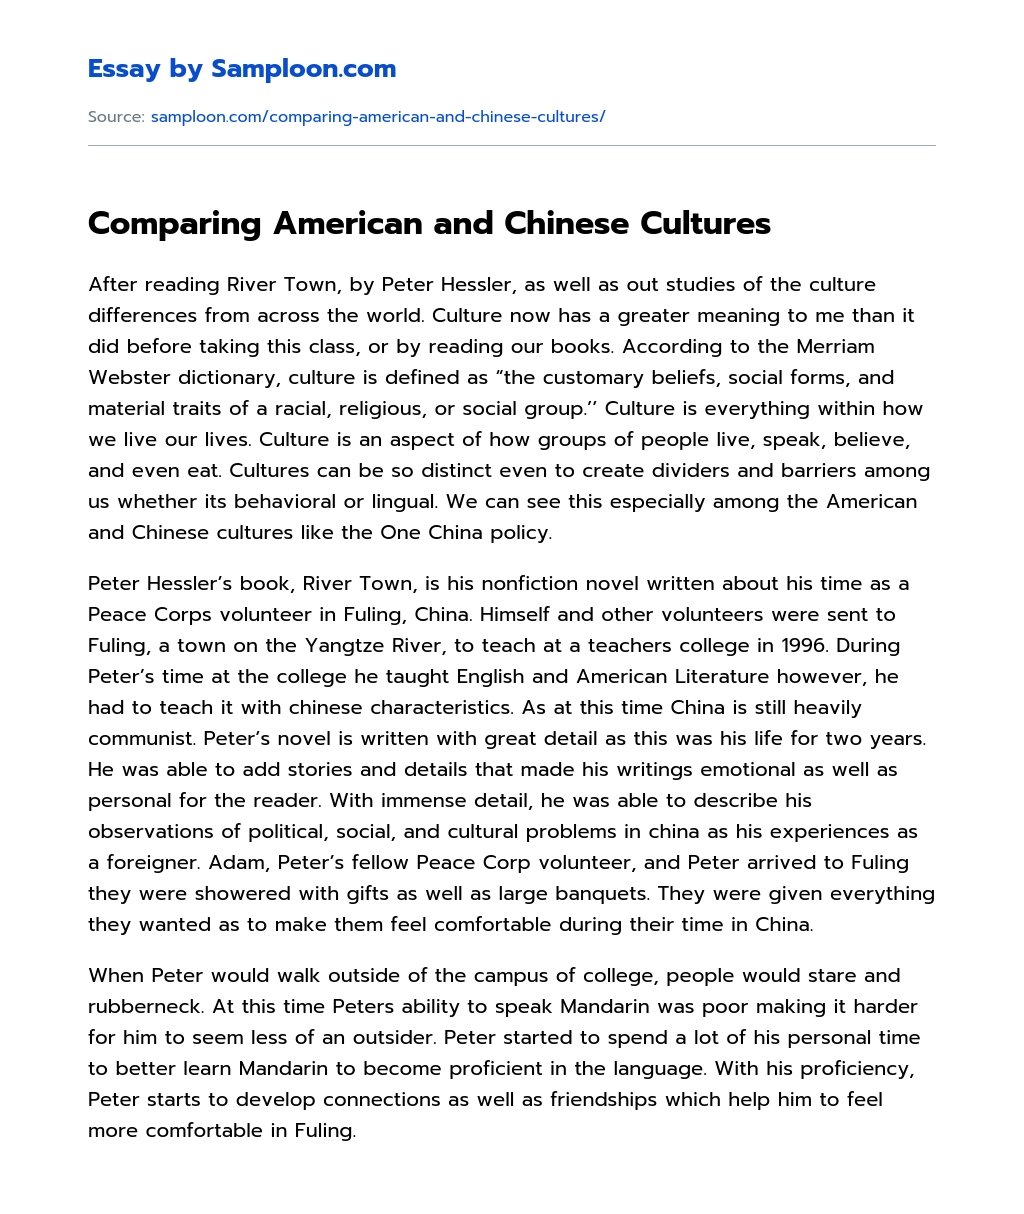 Comparing American and Chinese Cultures essay